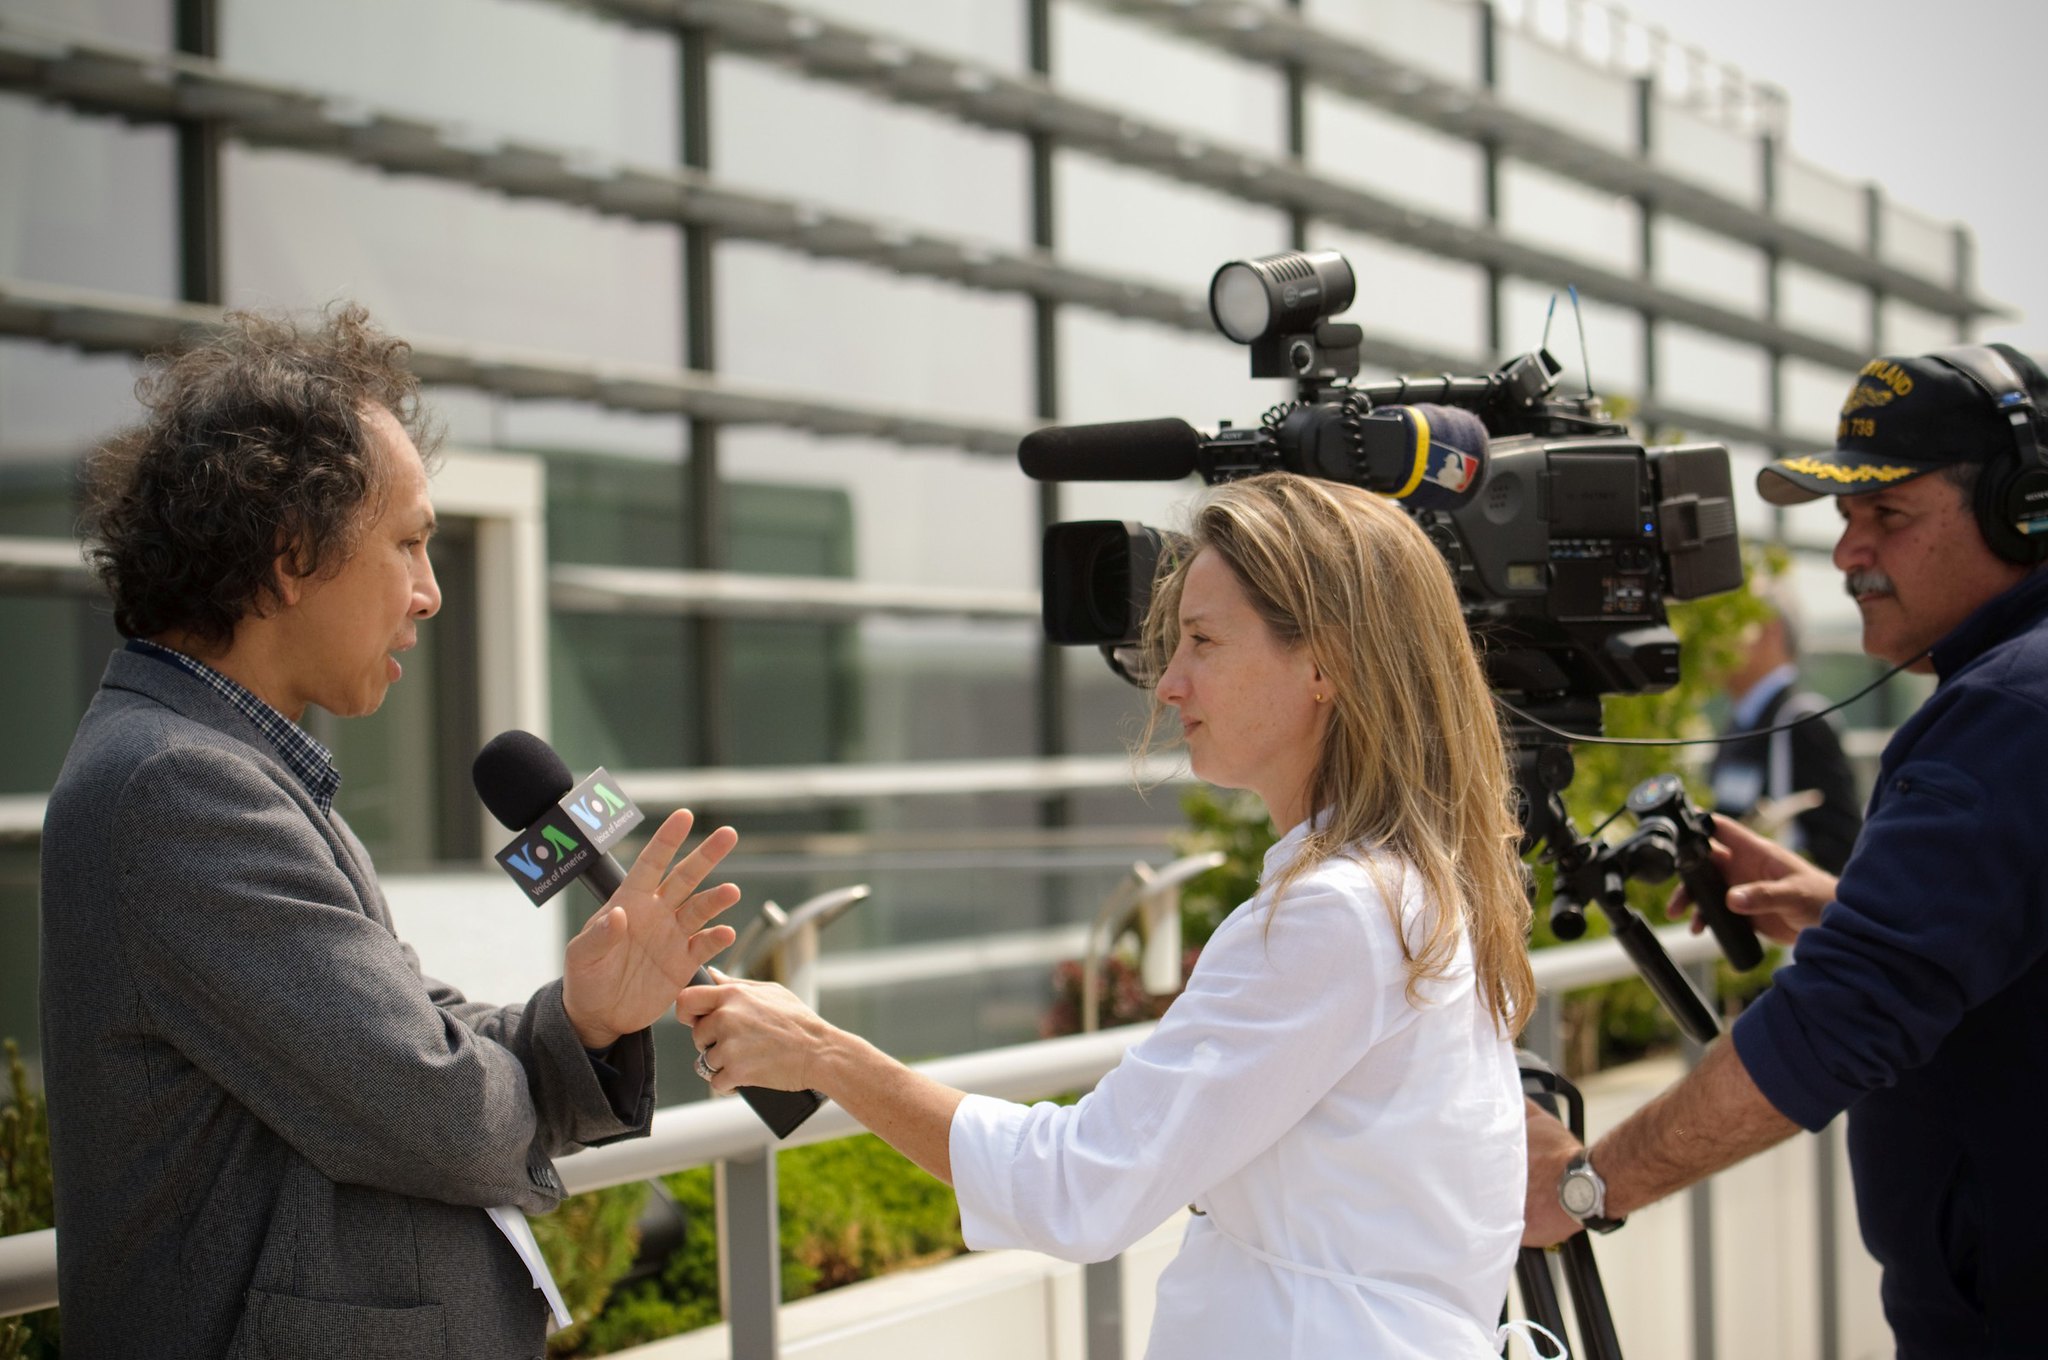 Journalist interviewing person in front of a camera